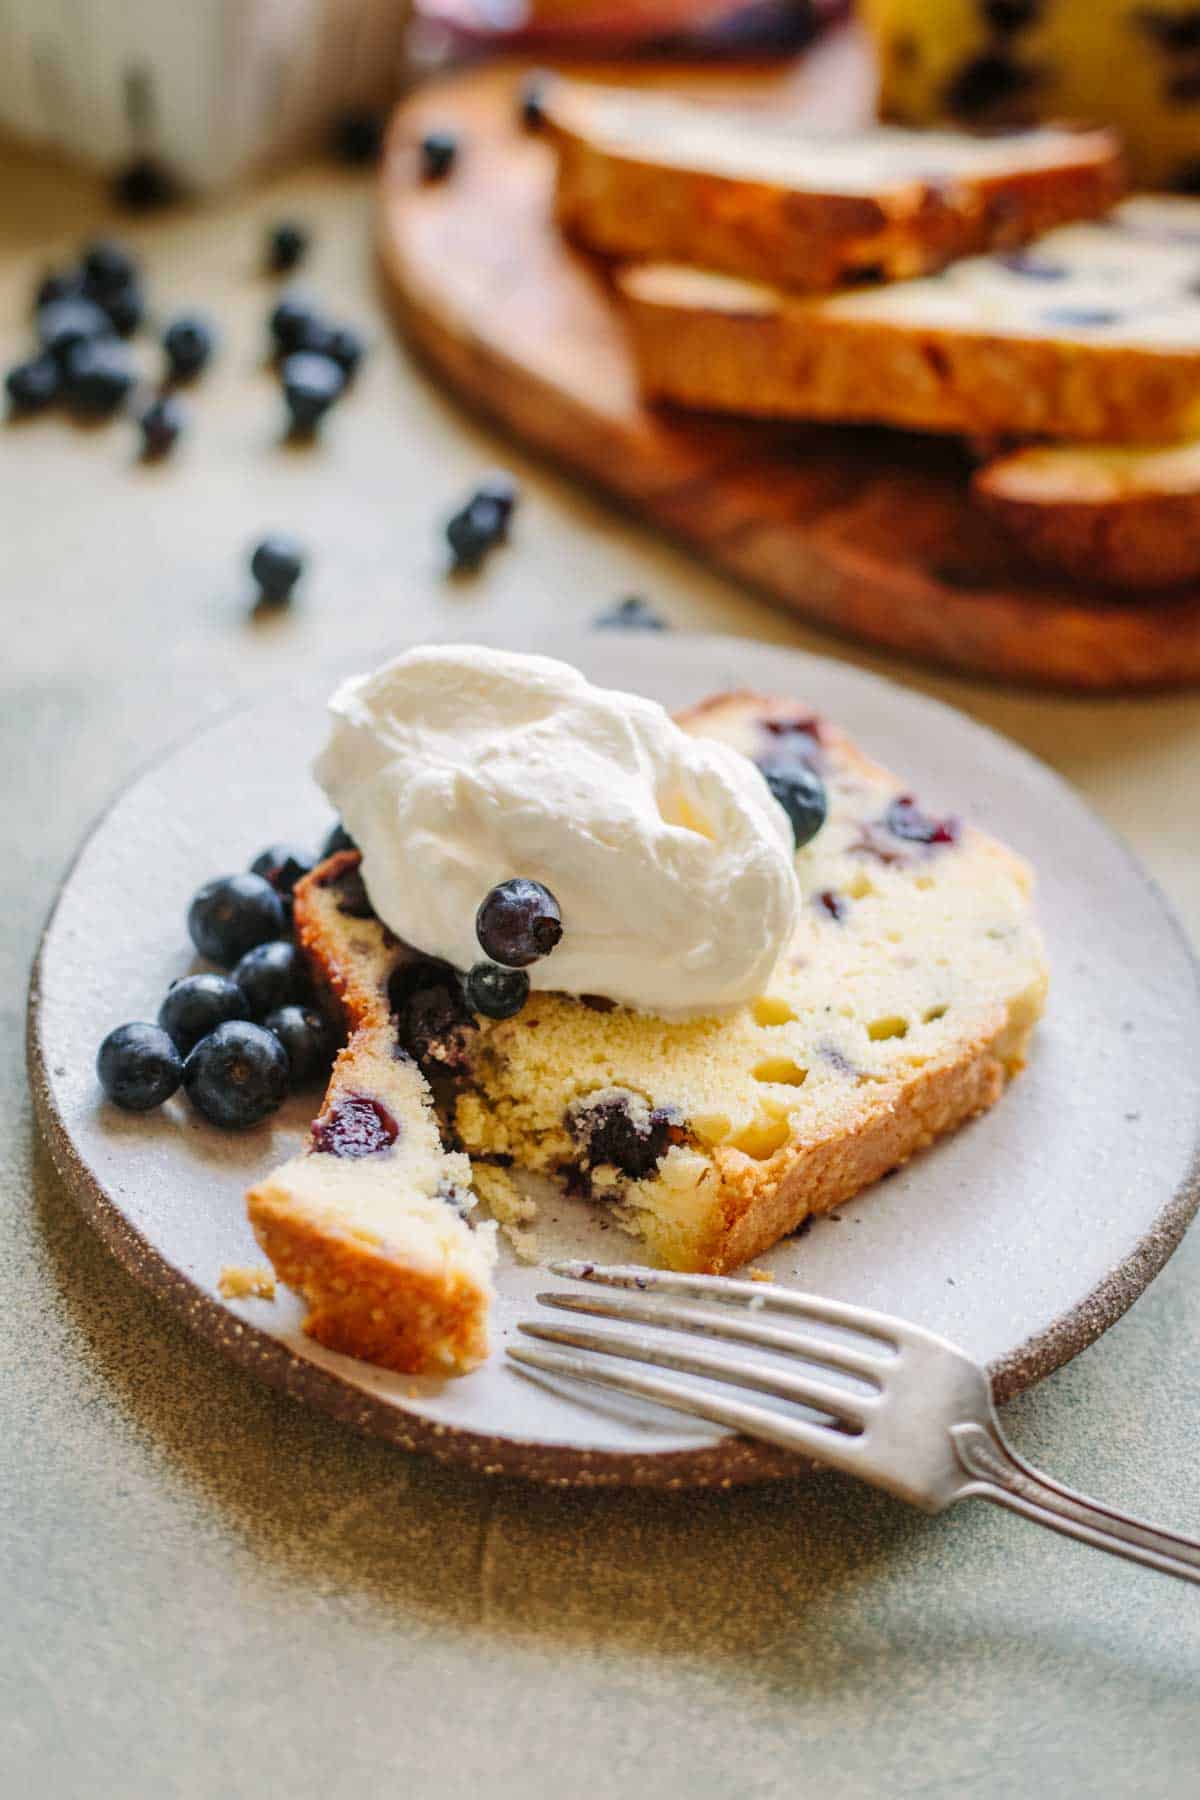 A fork cutting a bite off a slice of lemon blueberry pound cake on a small plate.